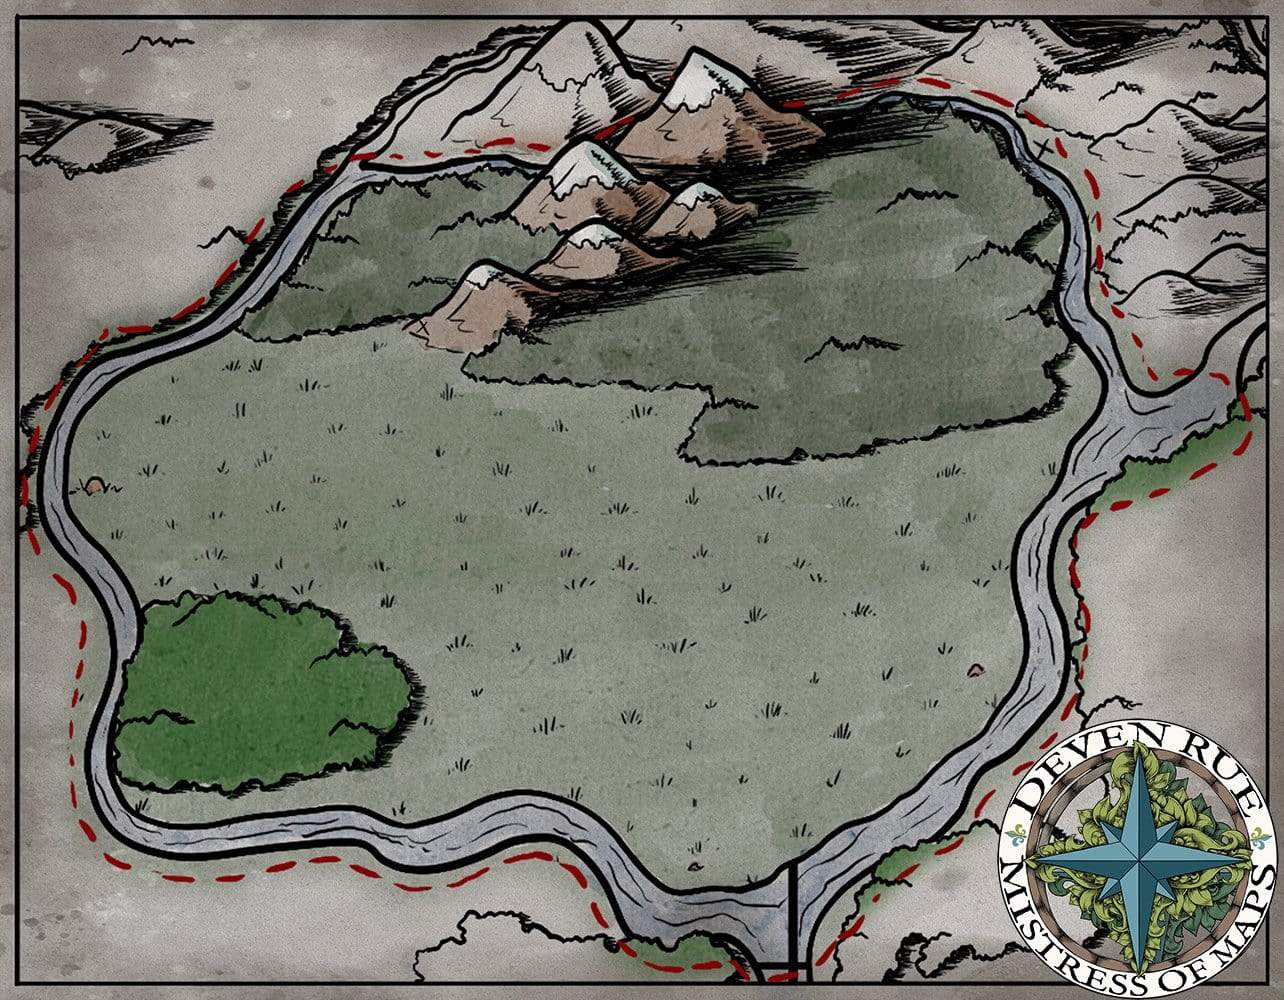 A preview of an unlabeled regional map from the Ayon VTT map pack by Deven Rue.